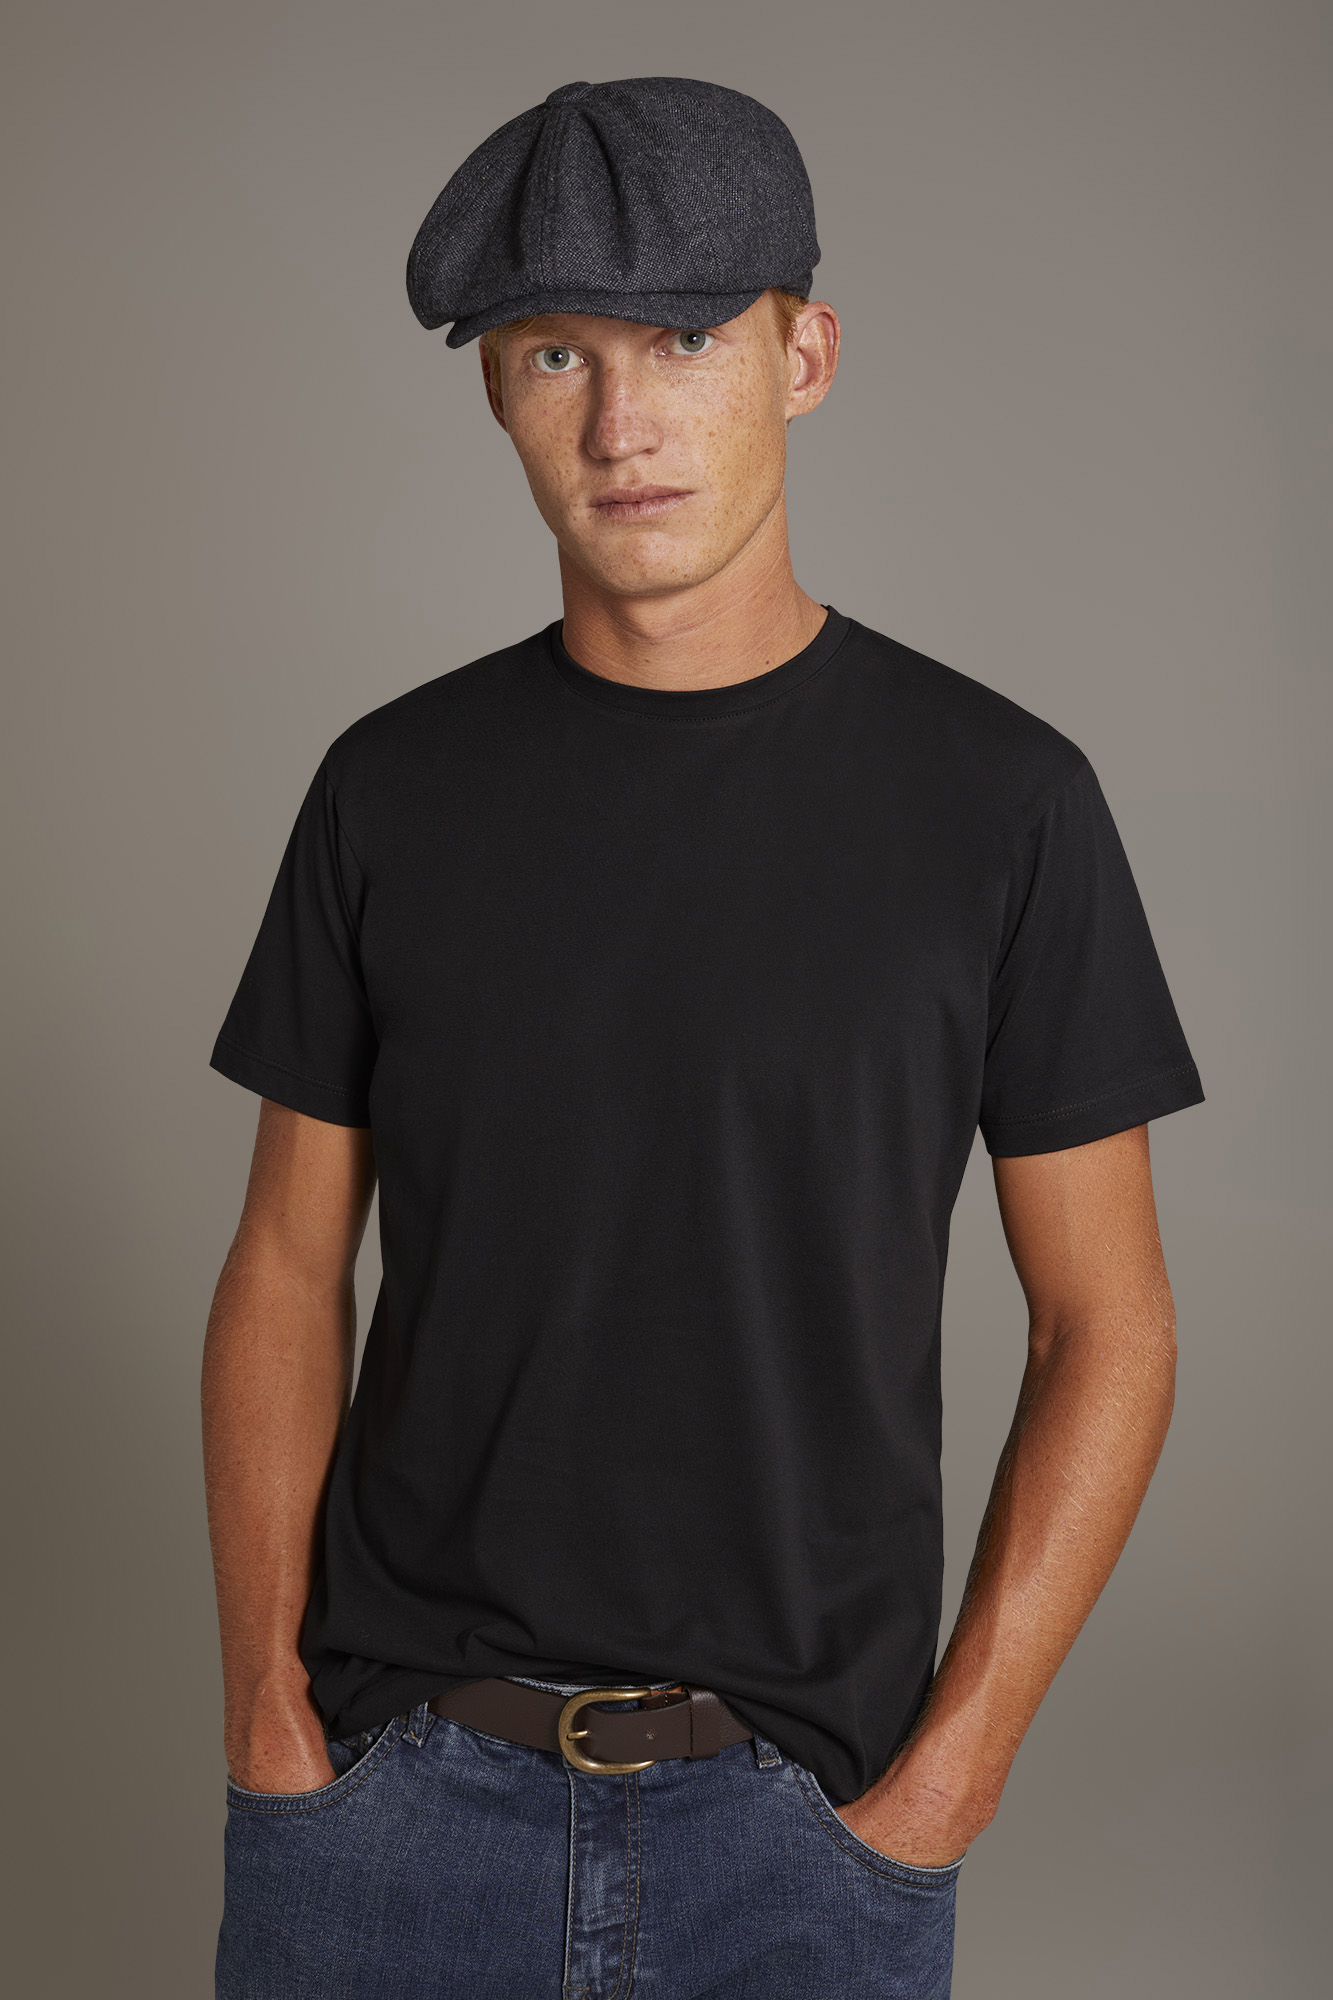 100% cotton made in Italy round neck t-shirt